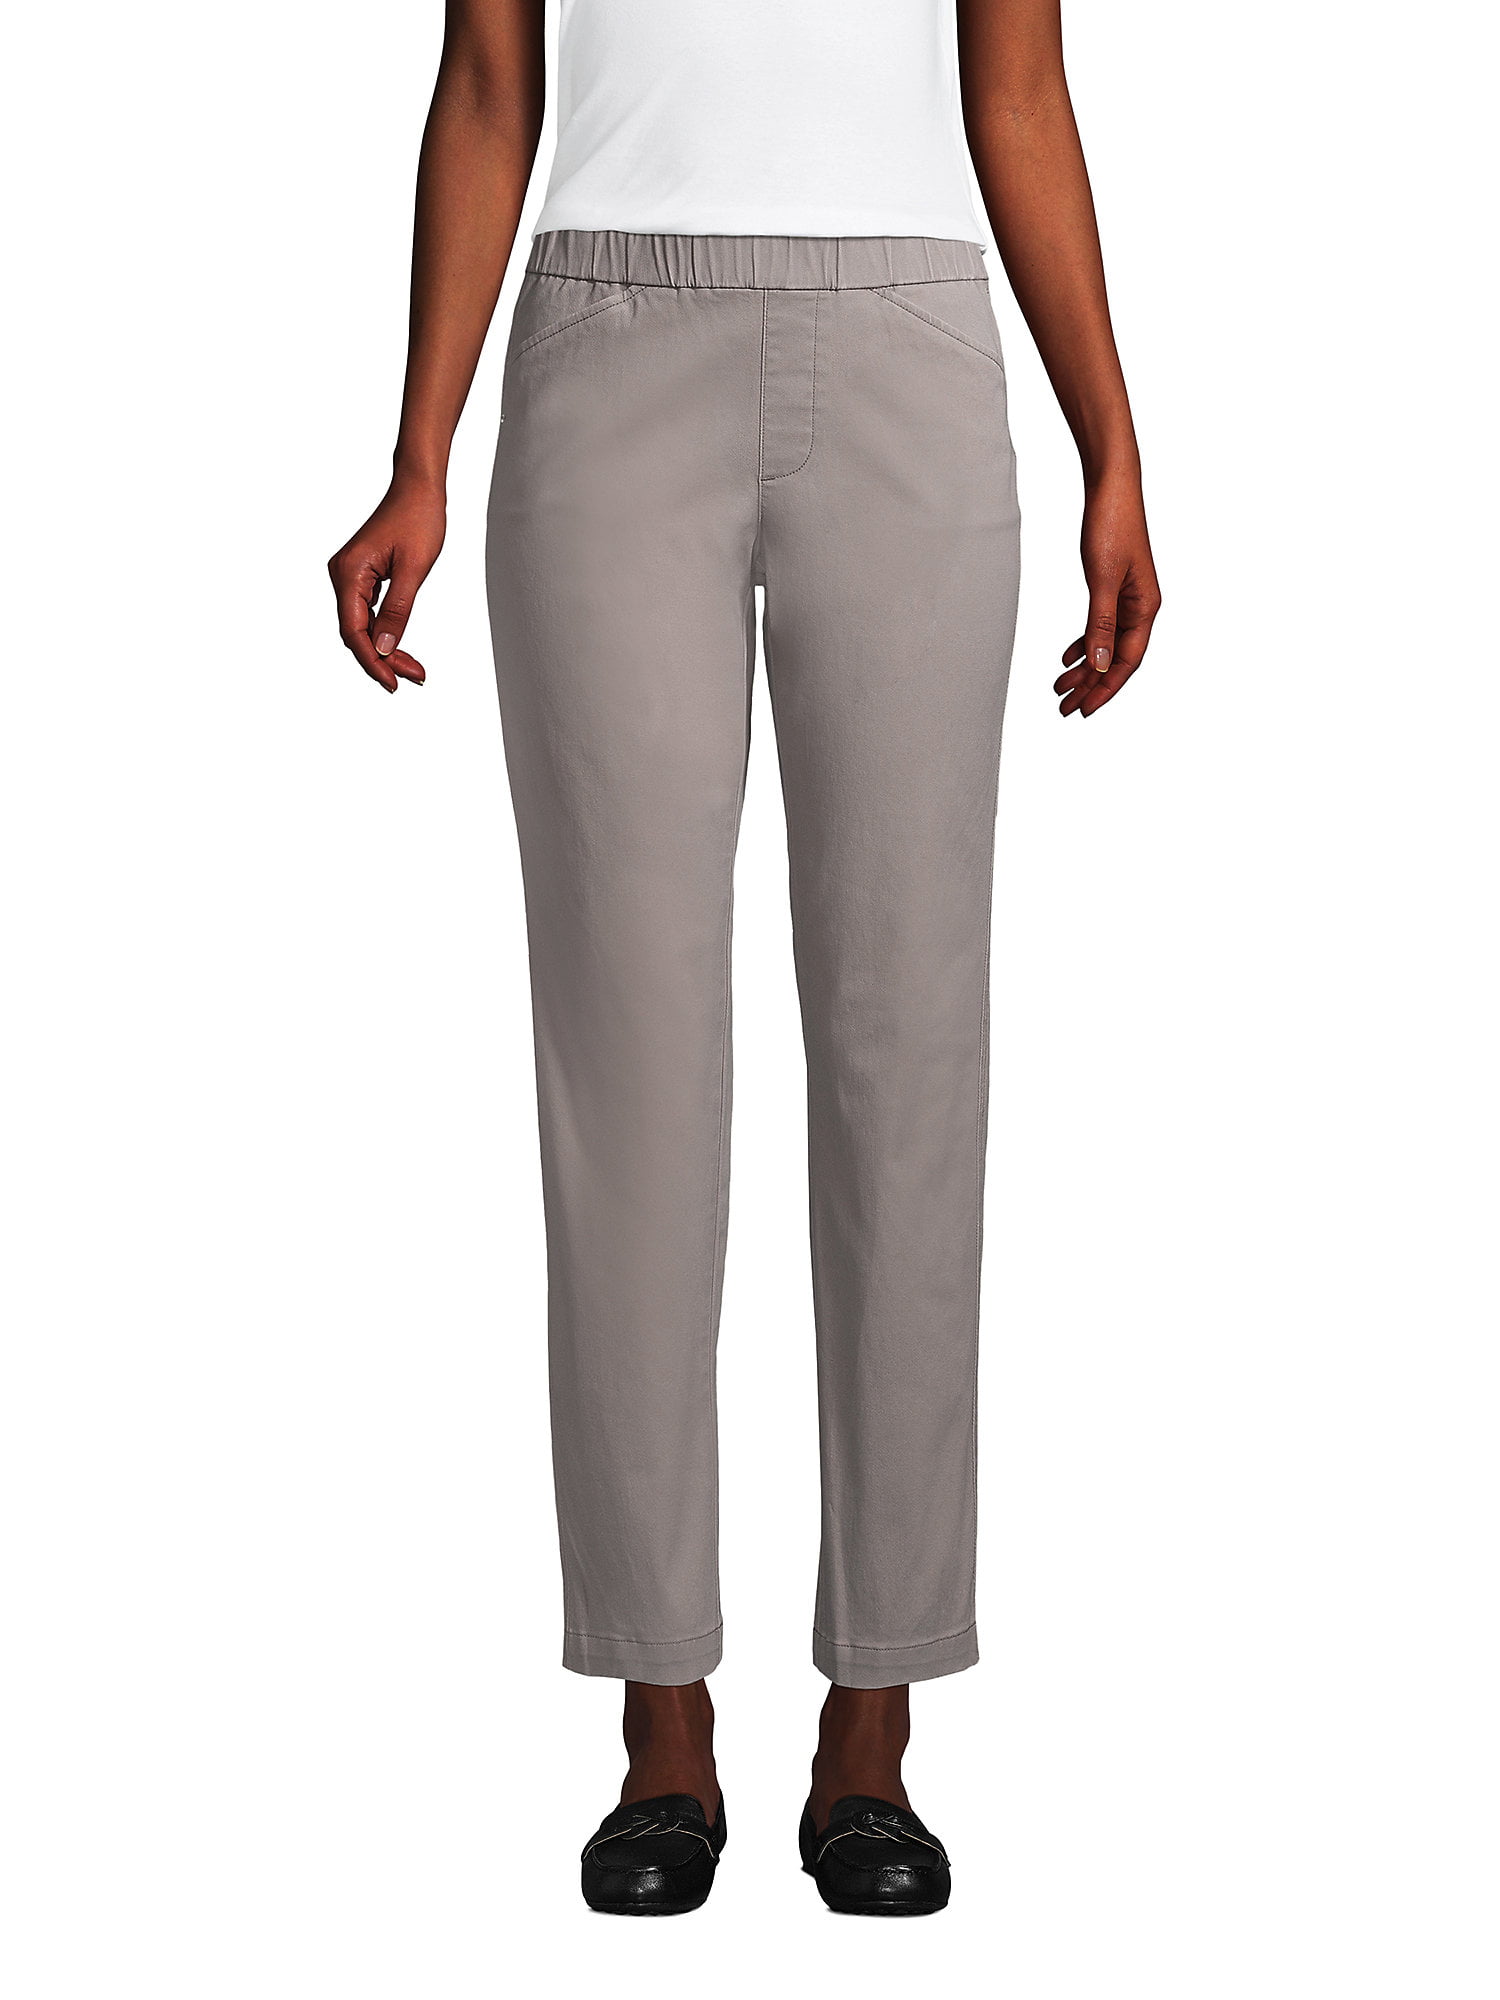 Lands' End Women's Tall Mid Rise Pull On Chino Ankle Pants